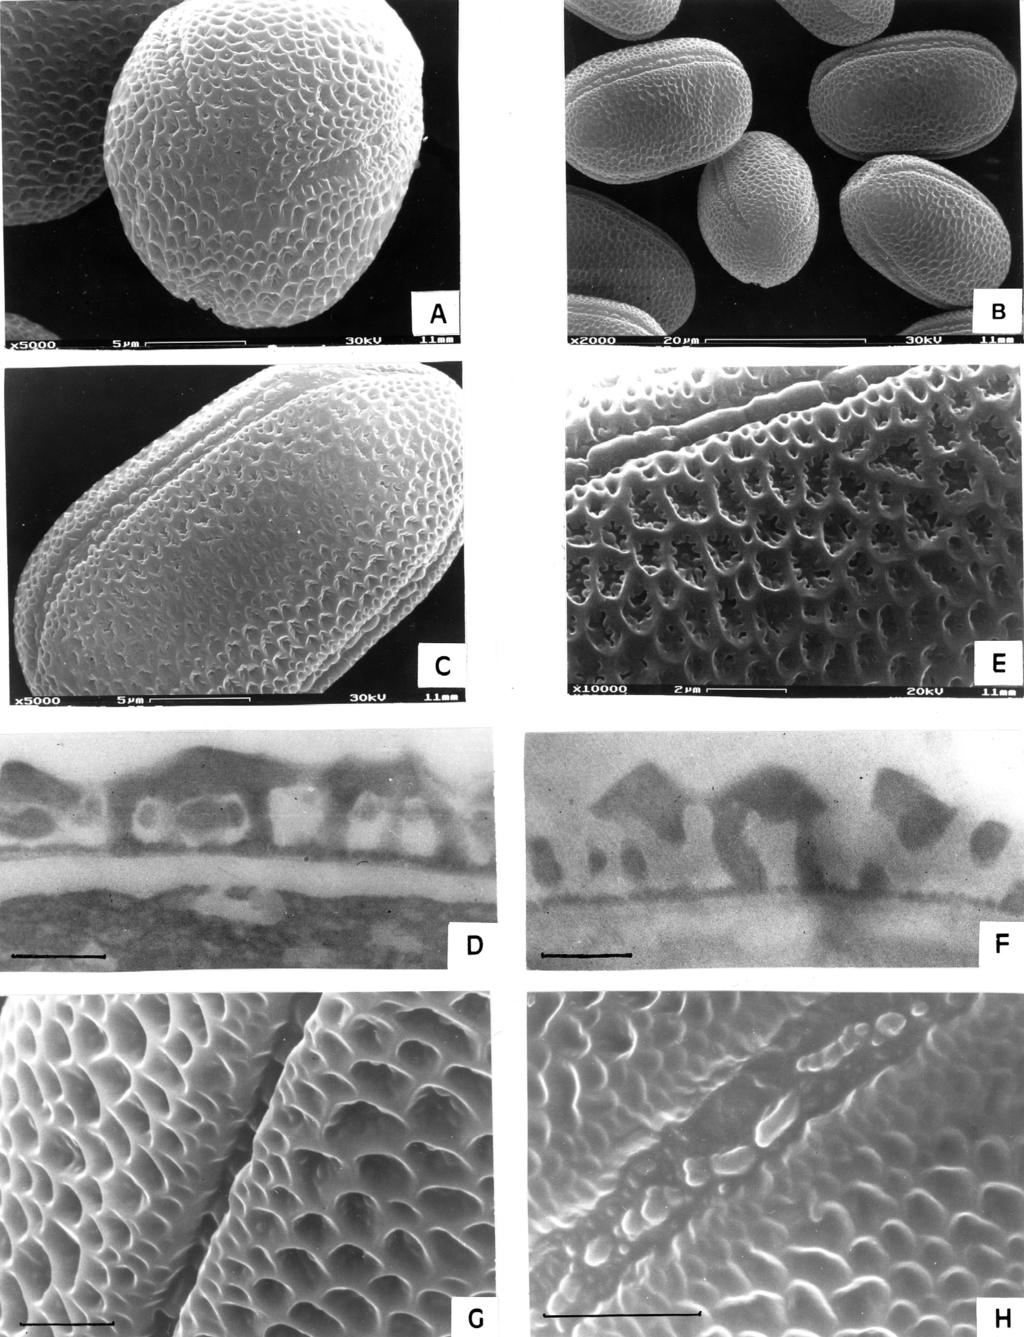 ANN. BOT. FENNICI 37 Pollen morphology of Onobrychis and Hedysarum 211 Fig. 2. A D: Onobrychis gracilis. A: SEM polar view and ornamentation in apocolpium. Scale bar = 5 µm.